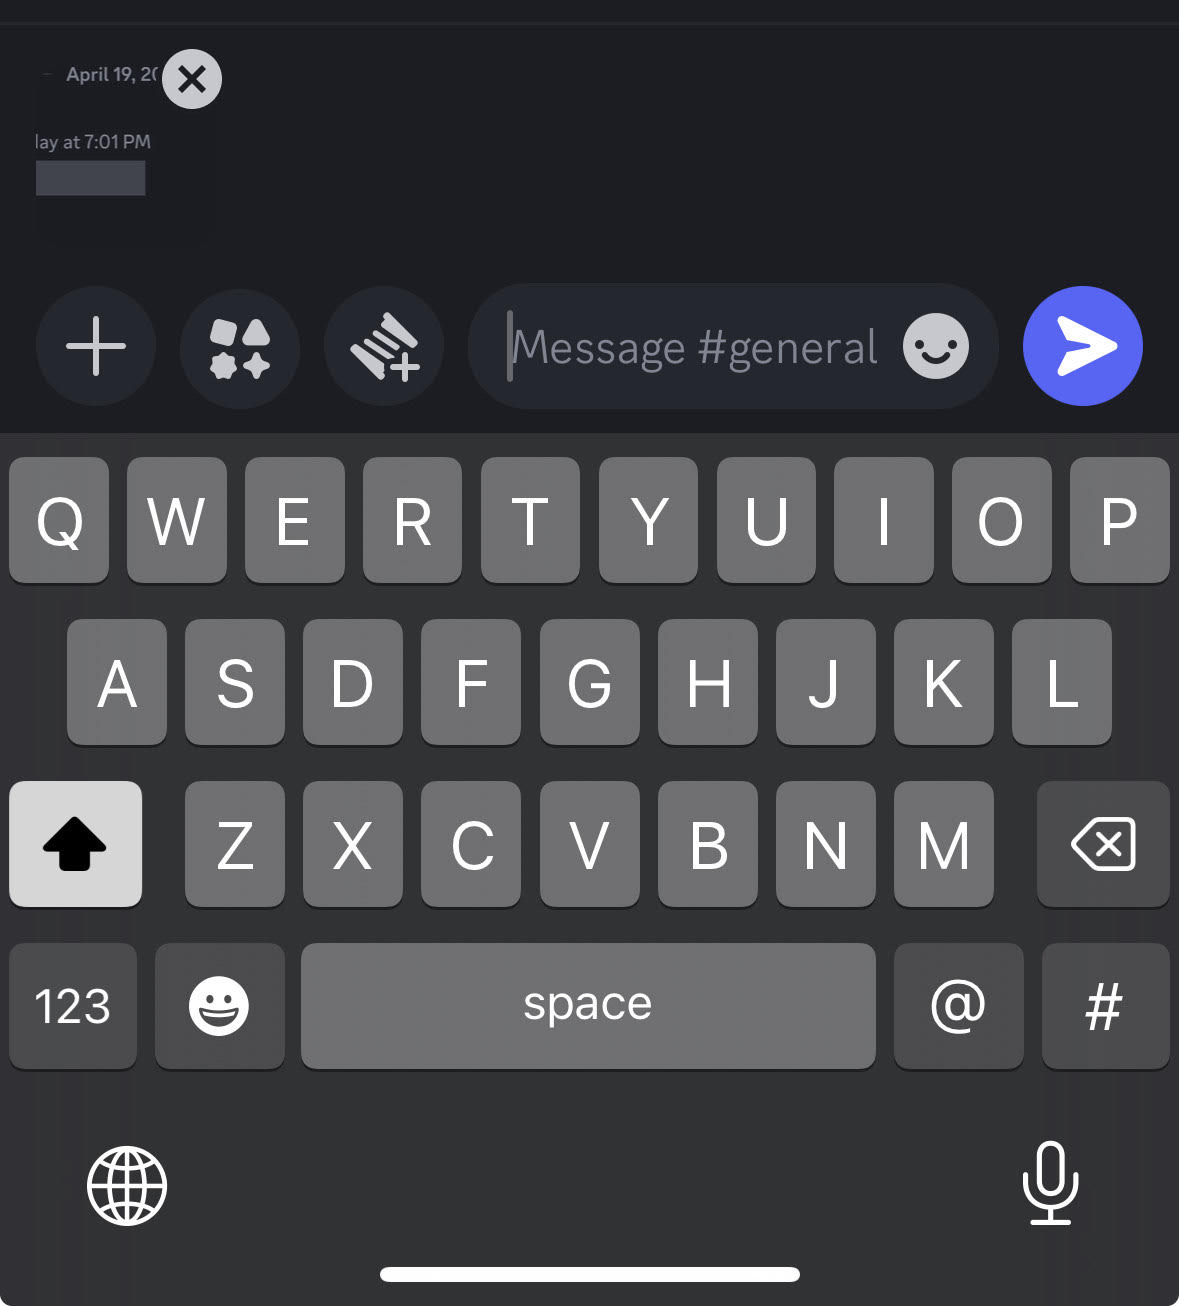 How To Spoiler Tag On Discord: Hide Messages, Images, Videos 9